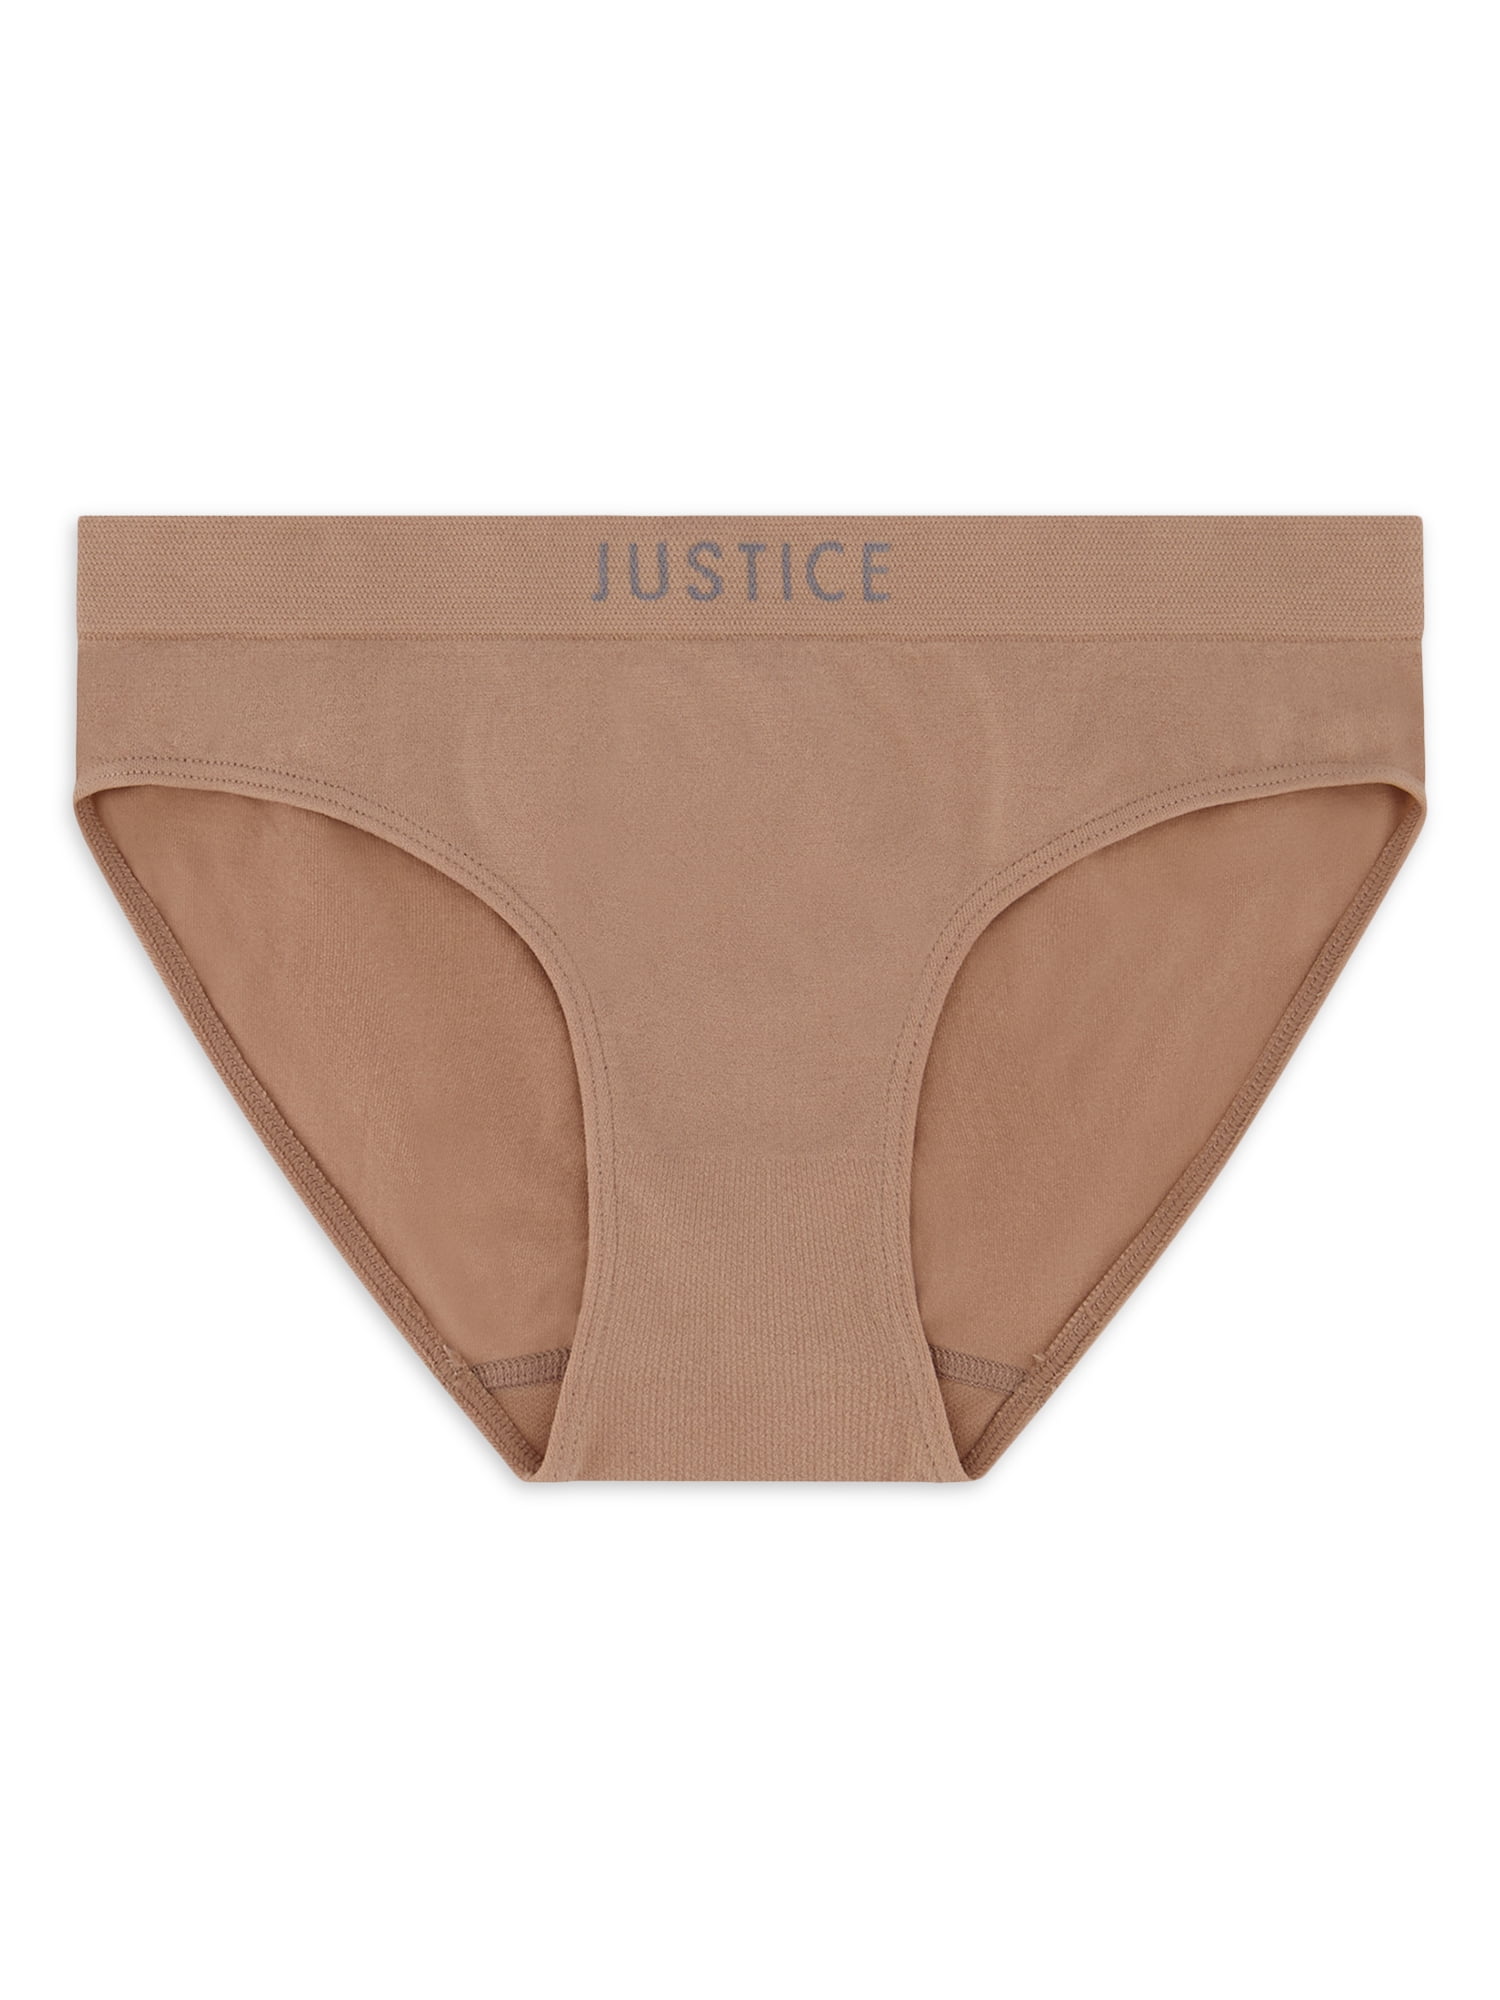 Justice Girls Oh So Soft Seamless 5 Pack Bikinis 